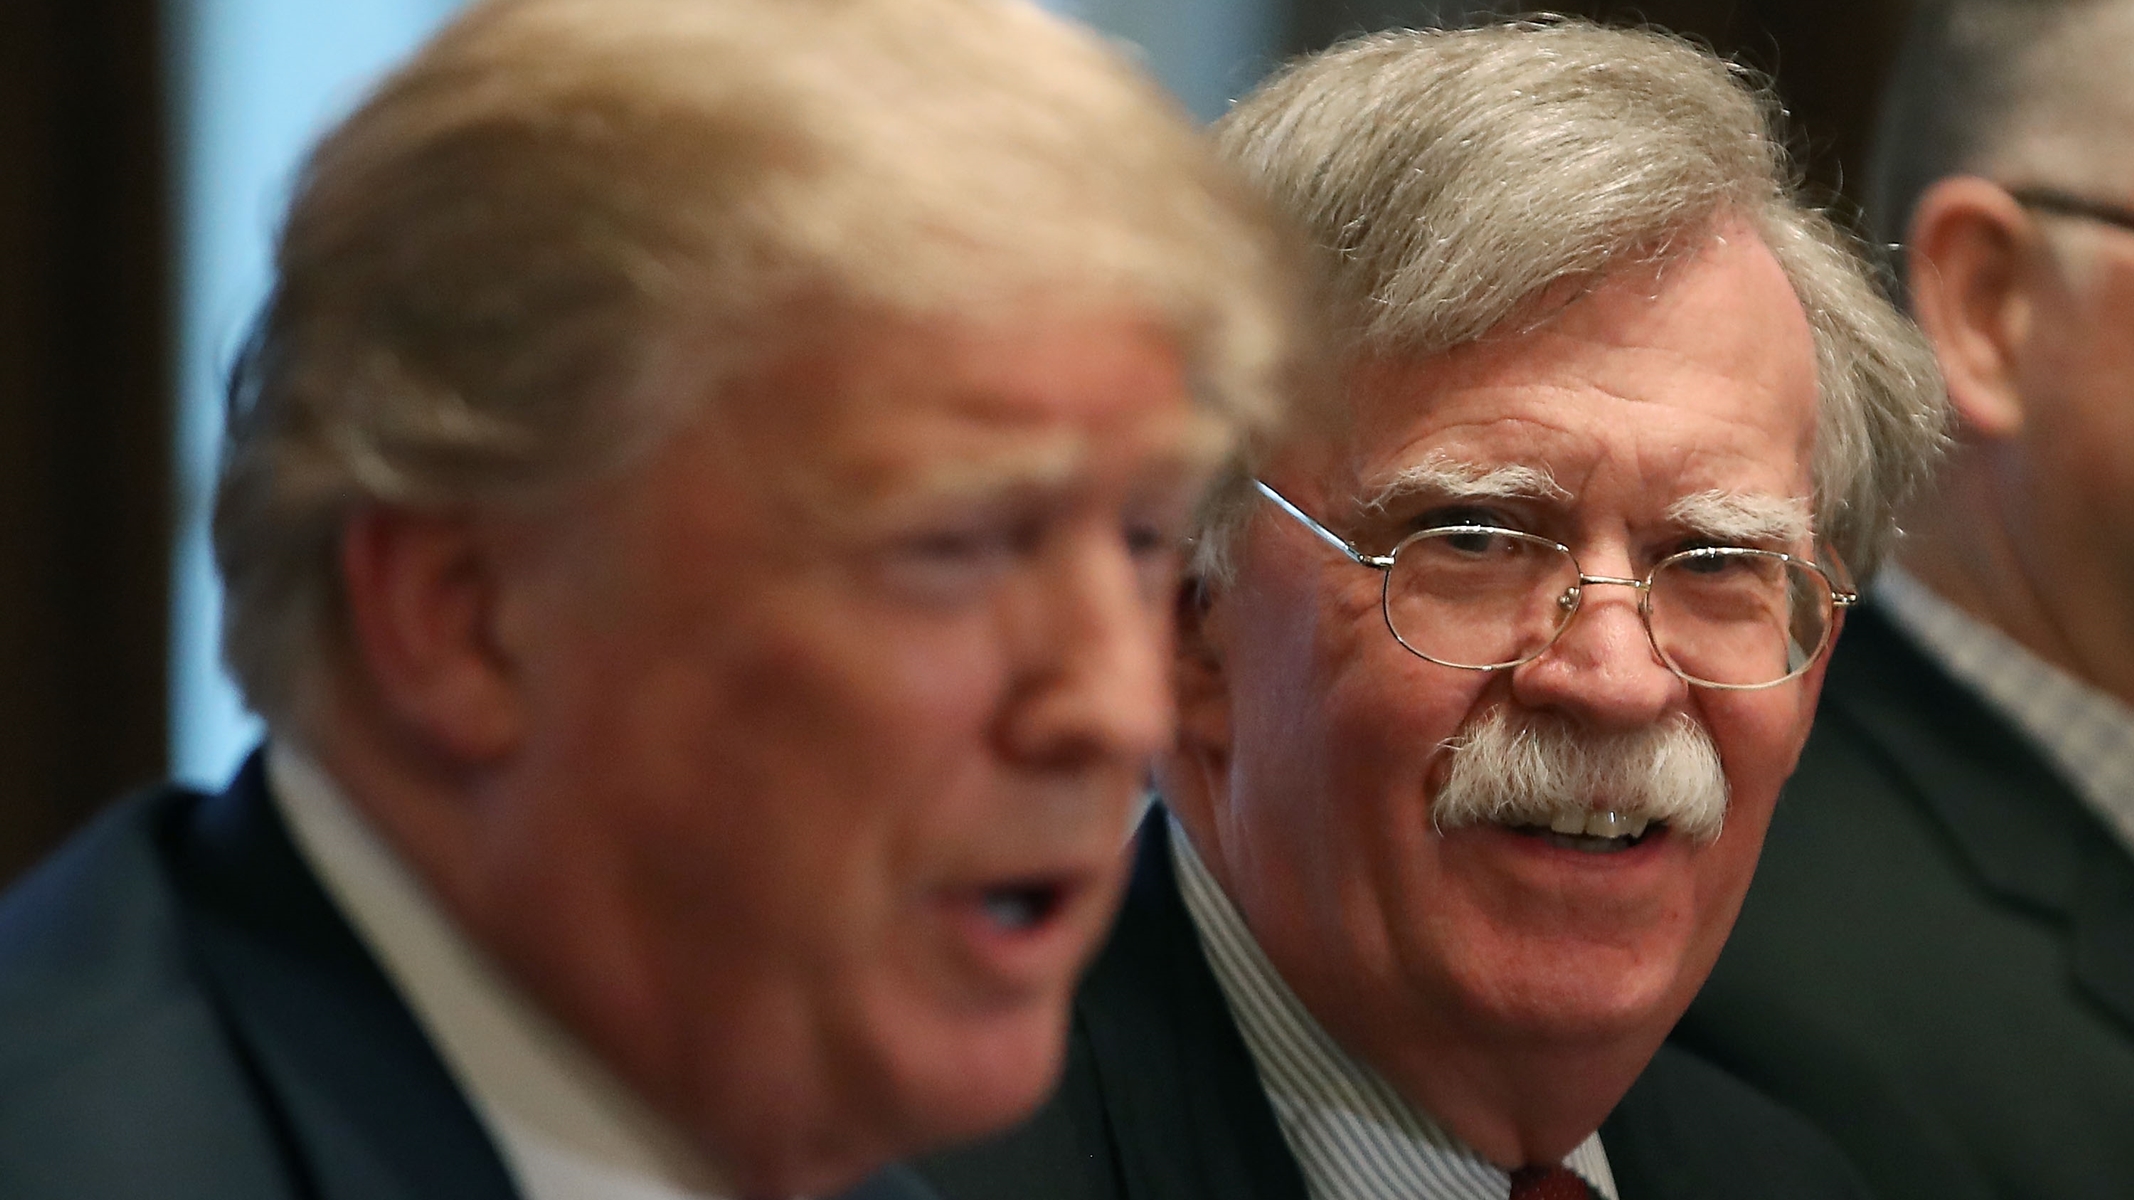 If the White House Wants War with Iran, They're Probably Going to Get It